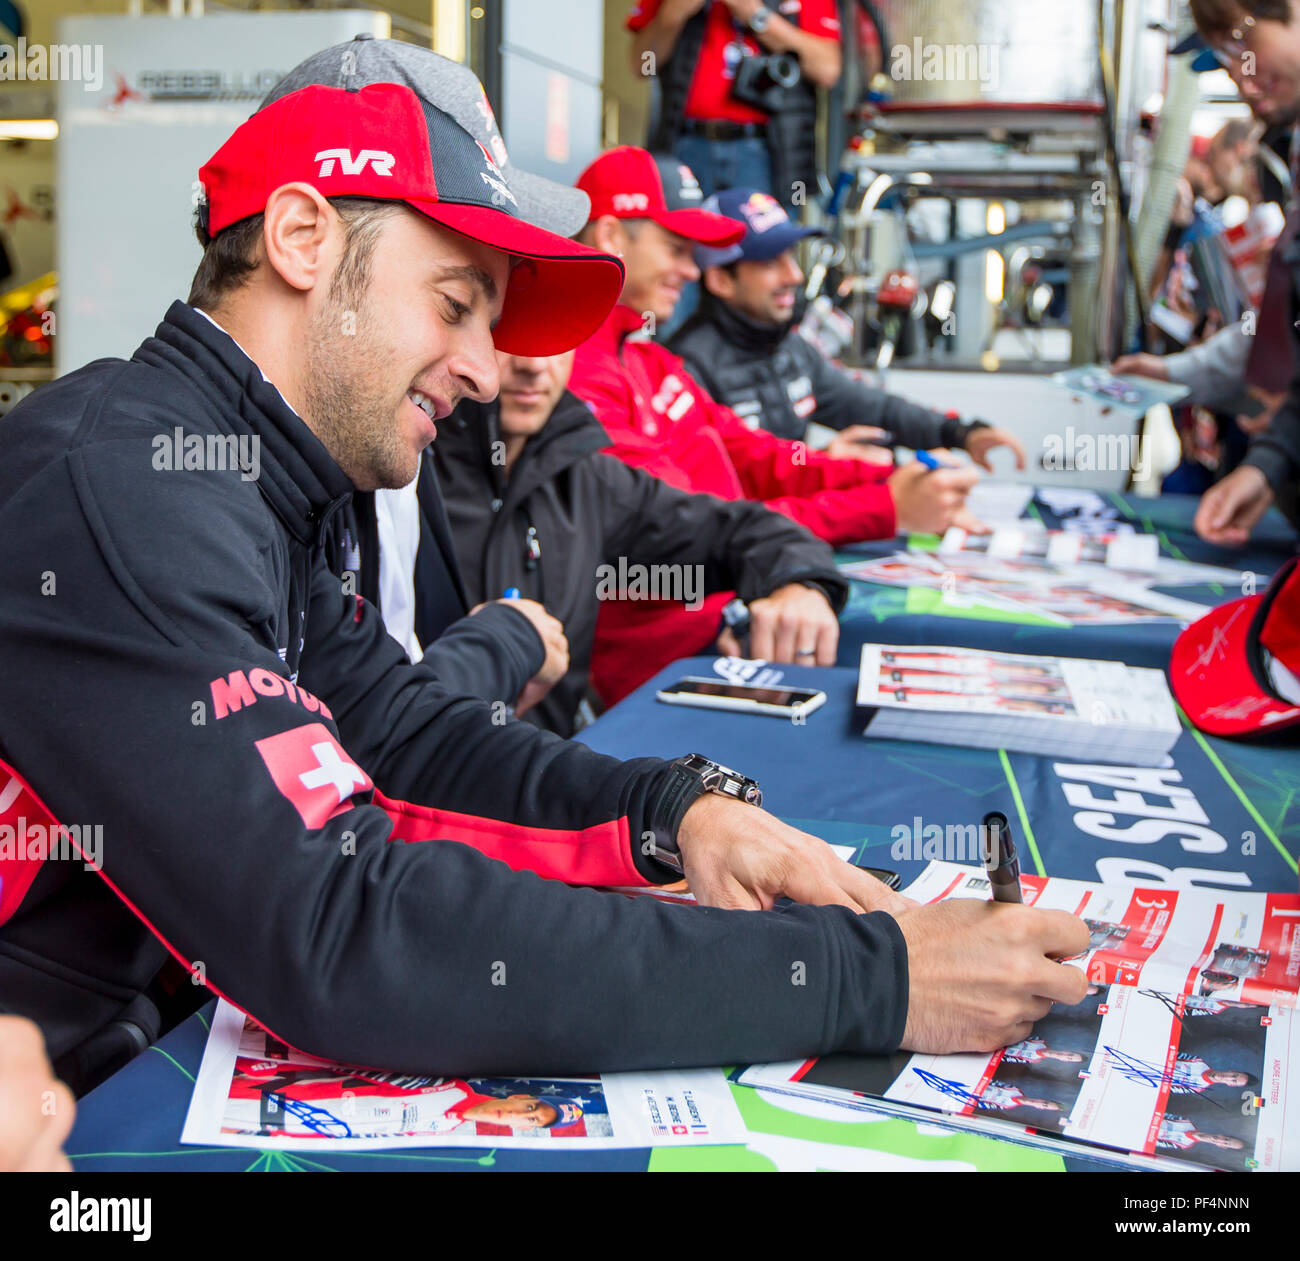 Silverstone Circuit, UK. 19th Aug, 2018. FIA World Endurance Championship; Mathias Beche (SUI) of the Rebellion R13 Gibson LMP1 racing car from Rebellion Racing (CHE) signing autographs outside the pit garage at Round 3 of the FIA World Endurance Championship at Silverstone Credit: Action Plus Sports/Alamy Live News Stock Photo